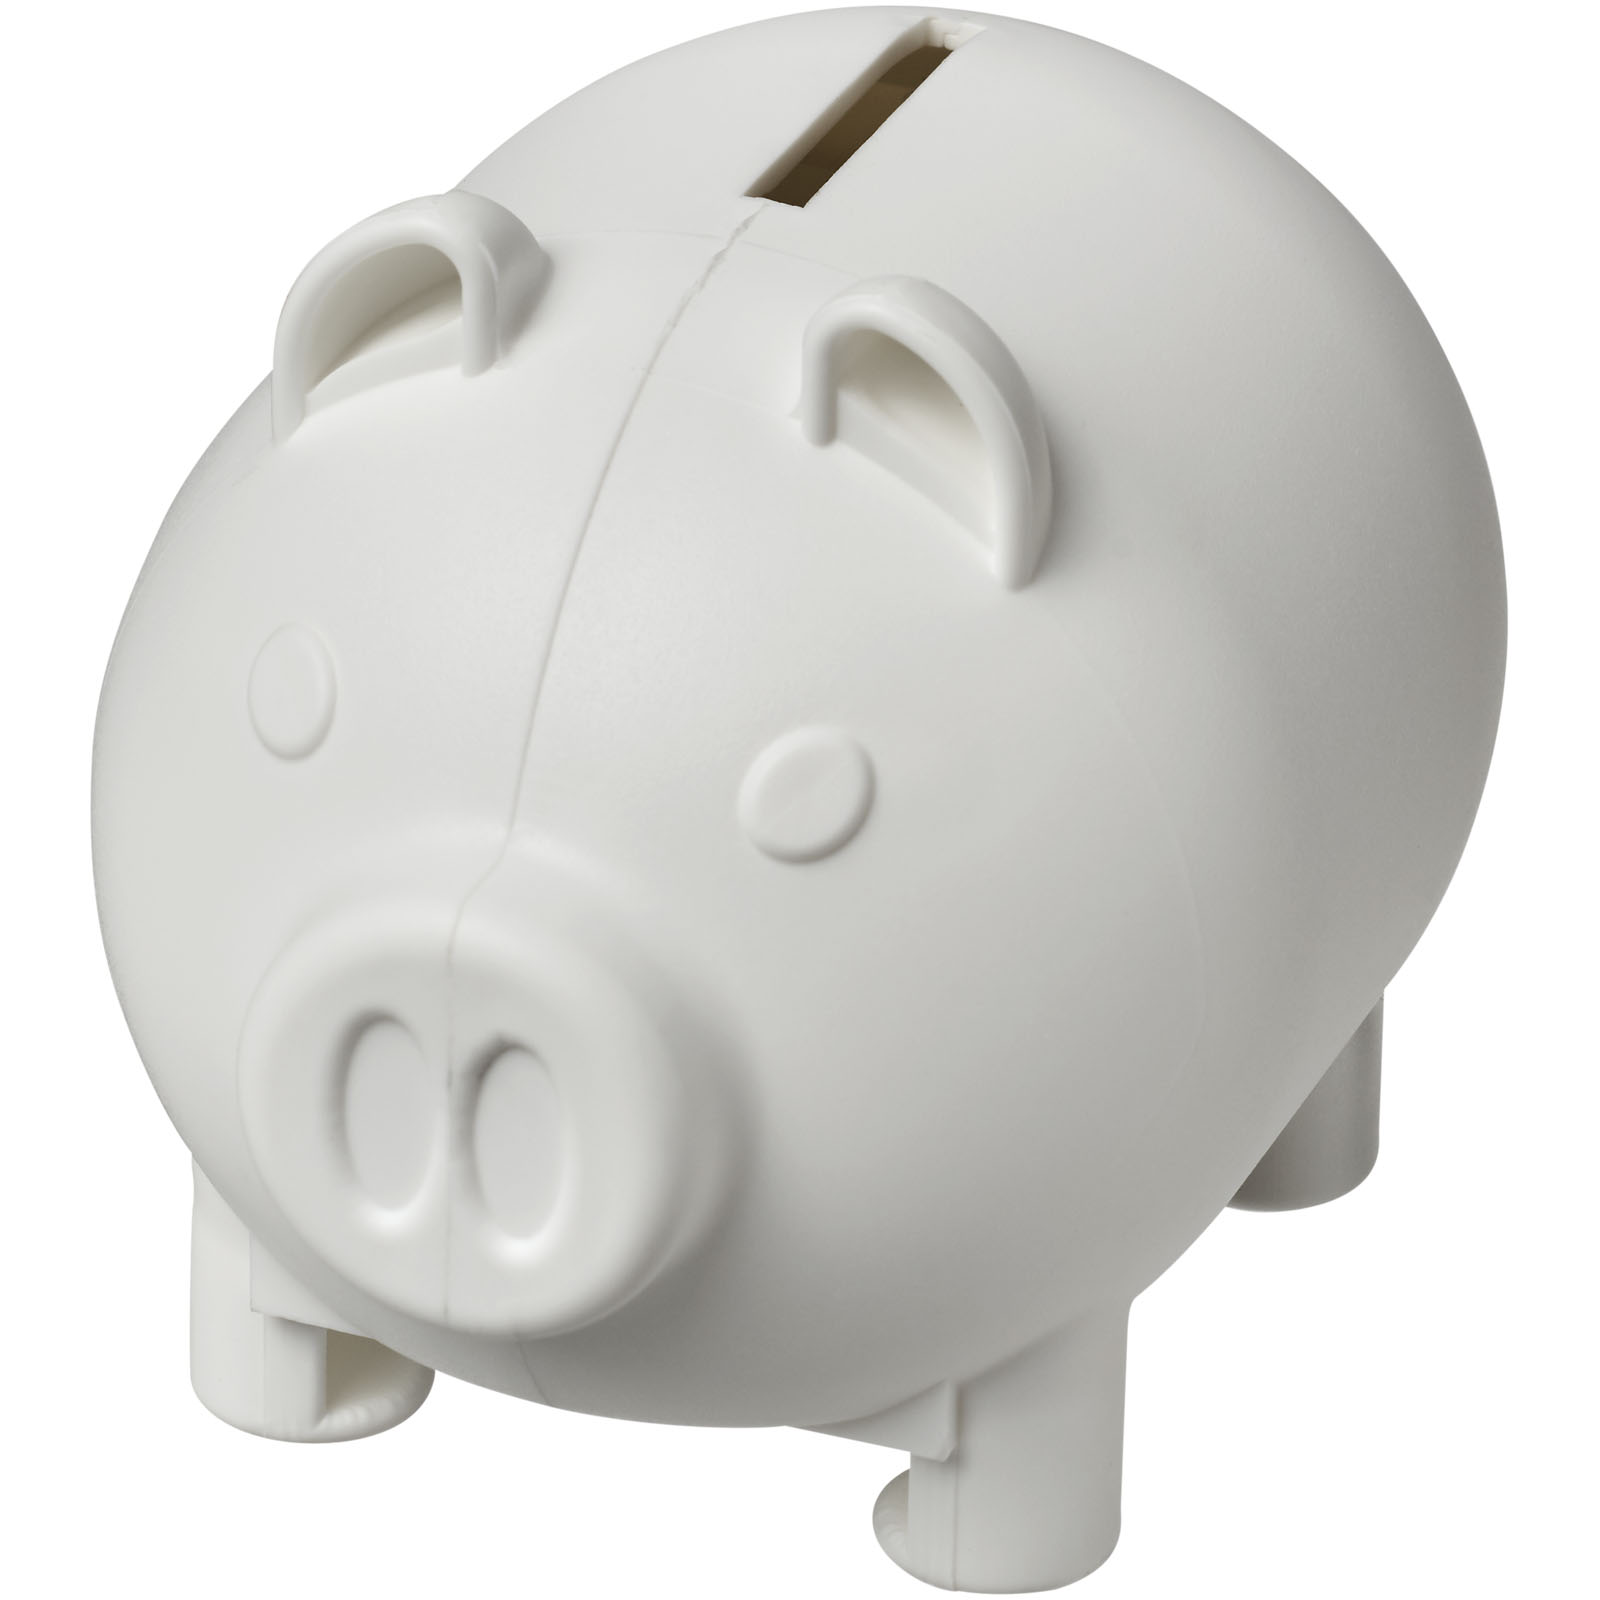 Home & Kitchen - Oink recycled plastic piggy bank